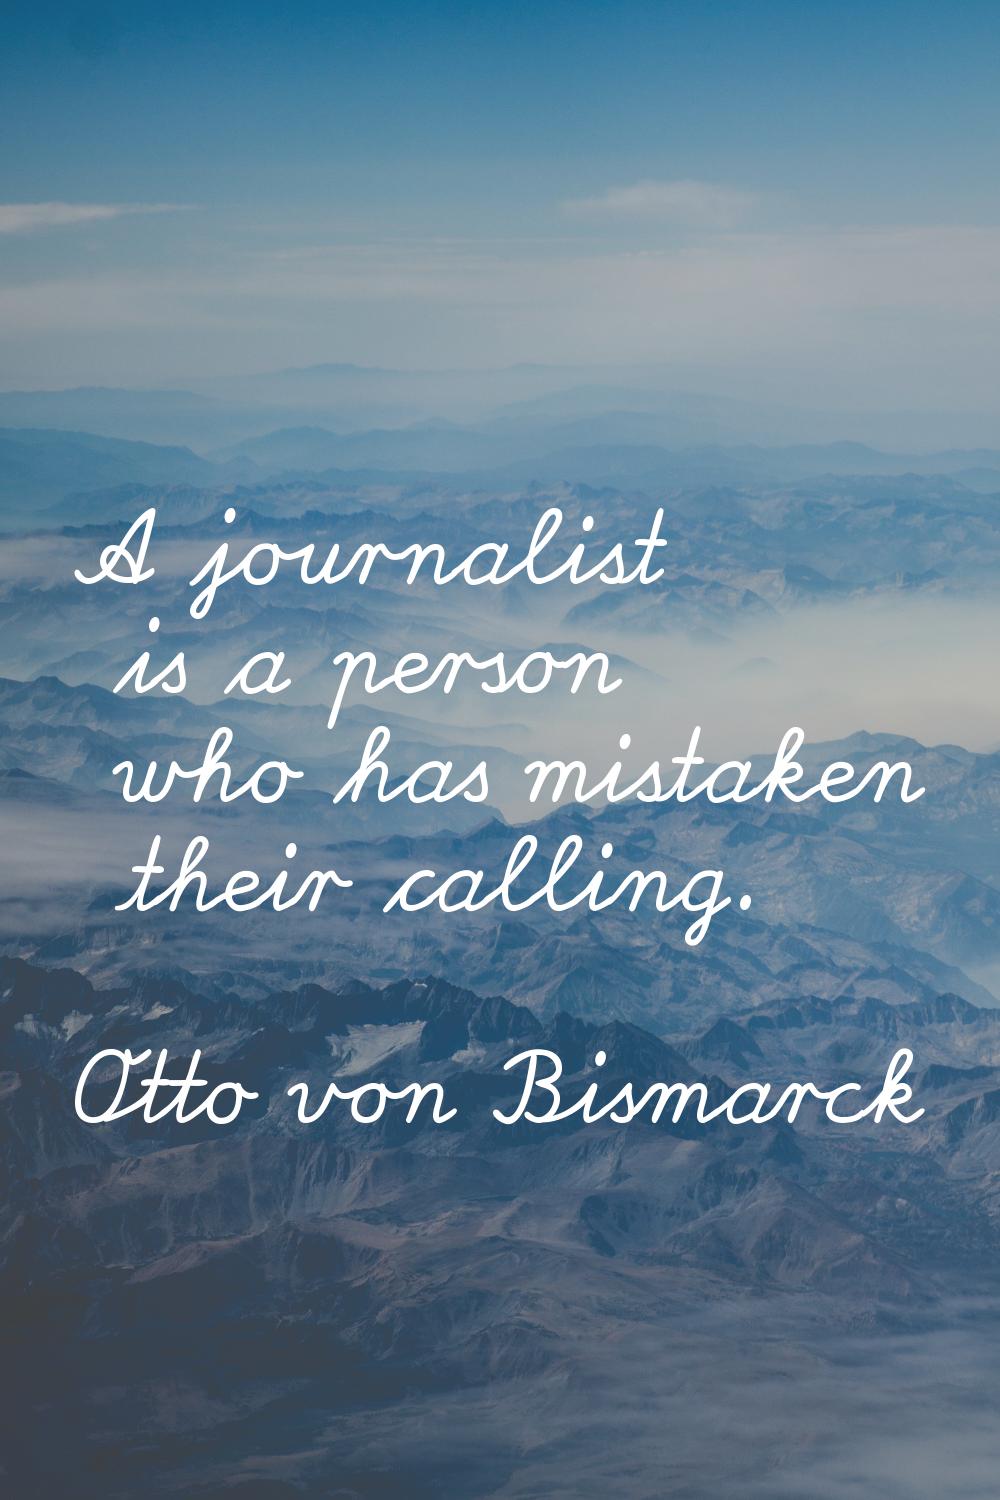 A journalist is a person who has mistaken their calling.